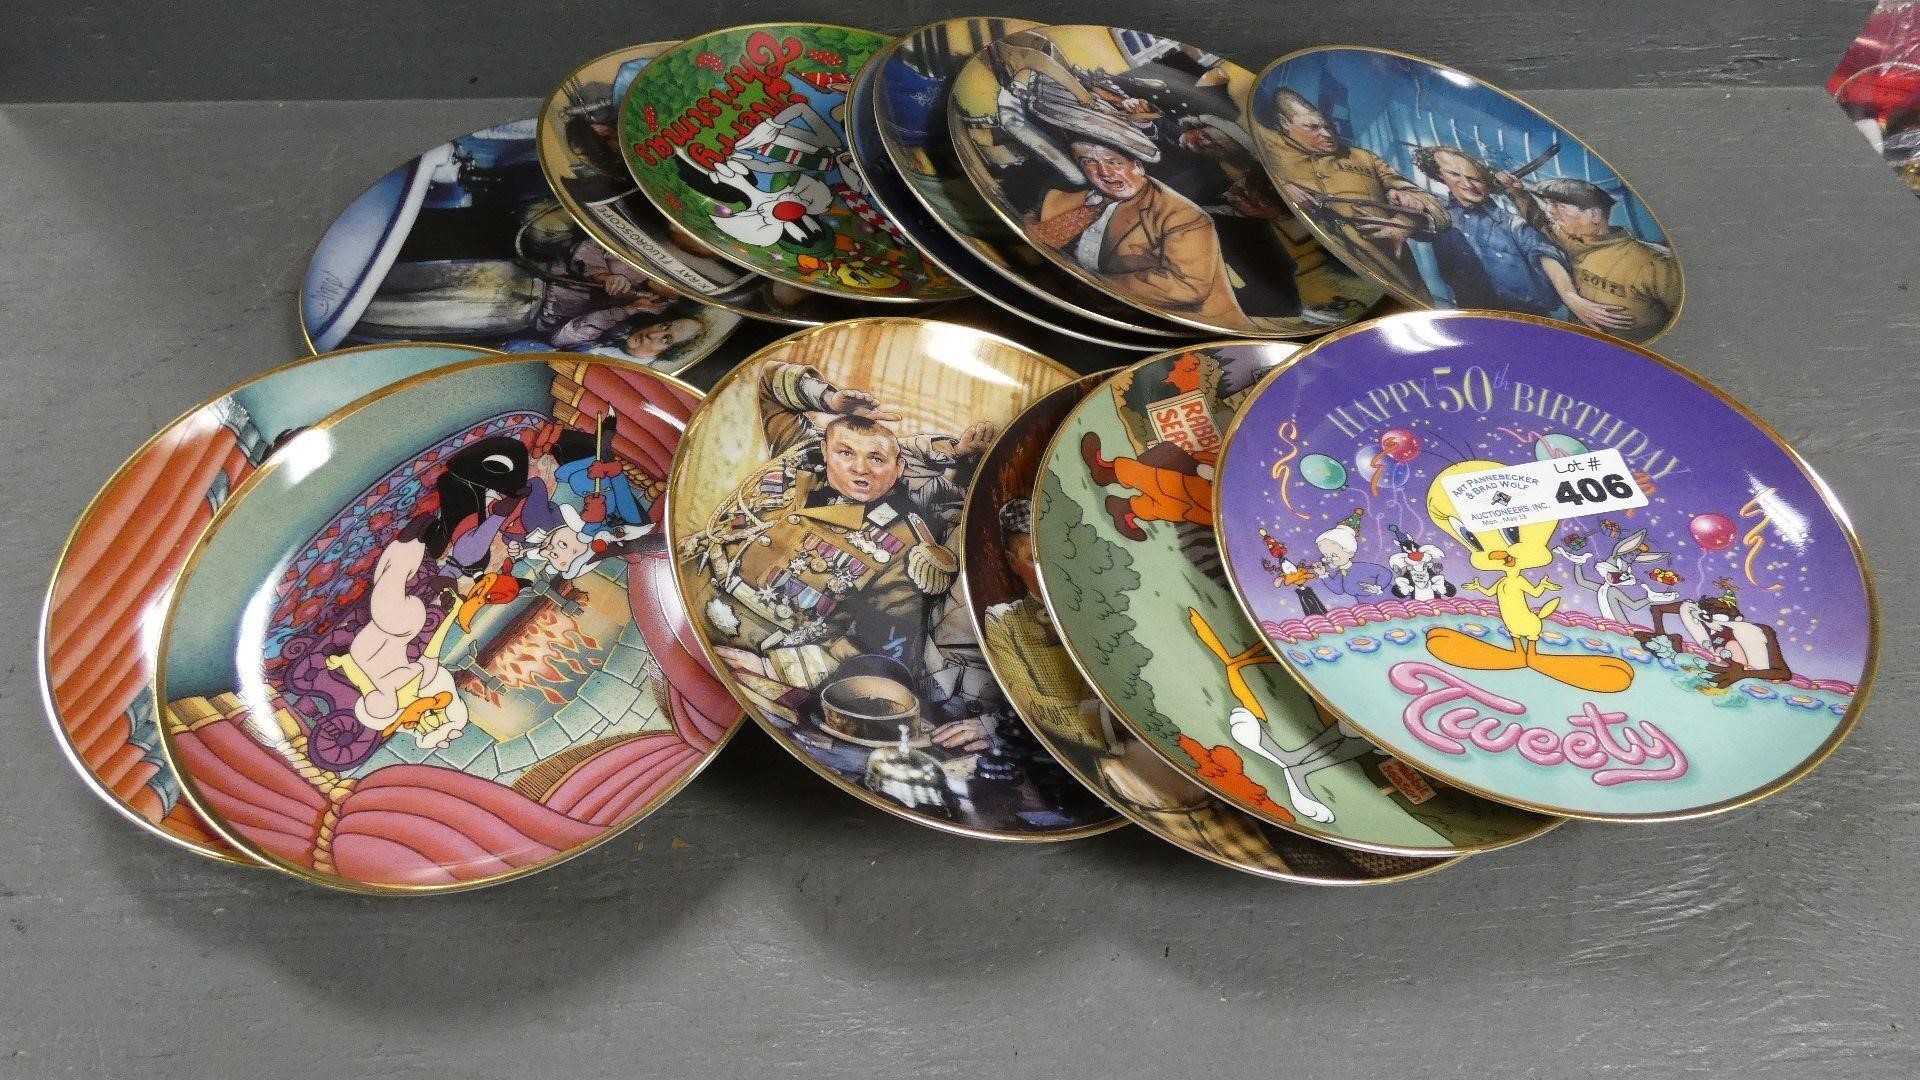 Three Stooges, Looney Tunes, Etc Collector Plates